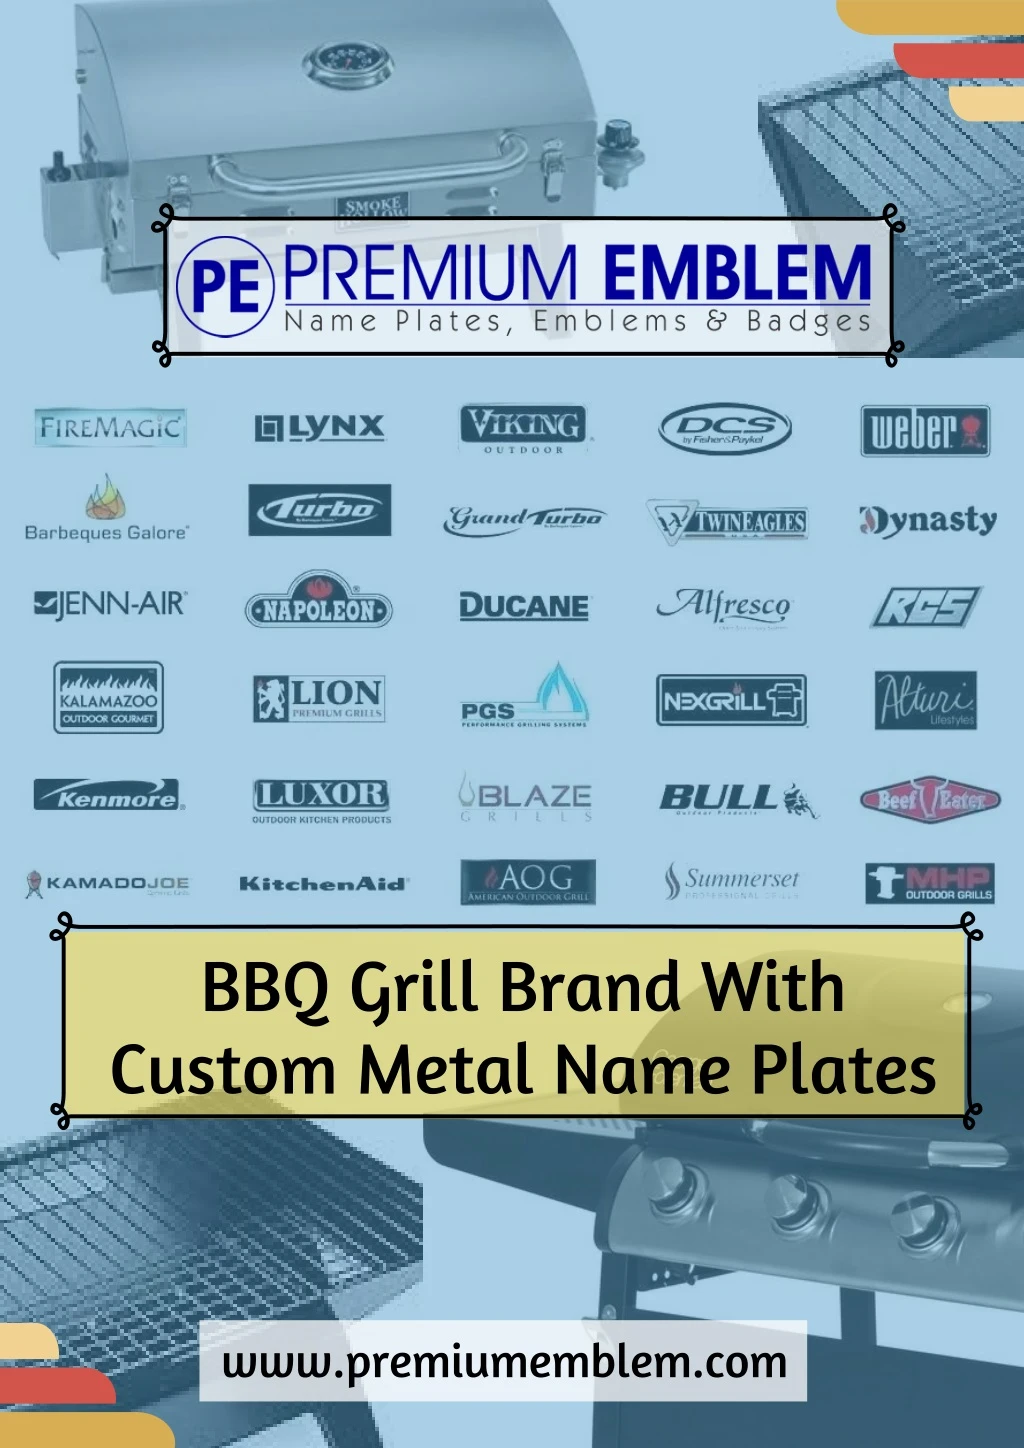 bbq grill brand with custom metal name plates